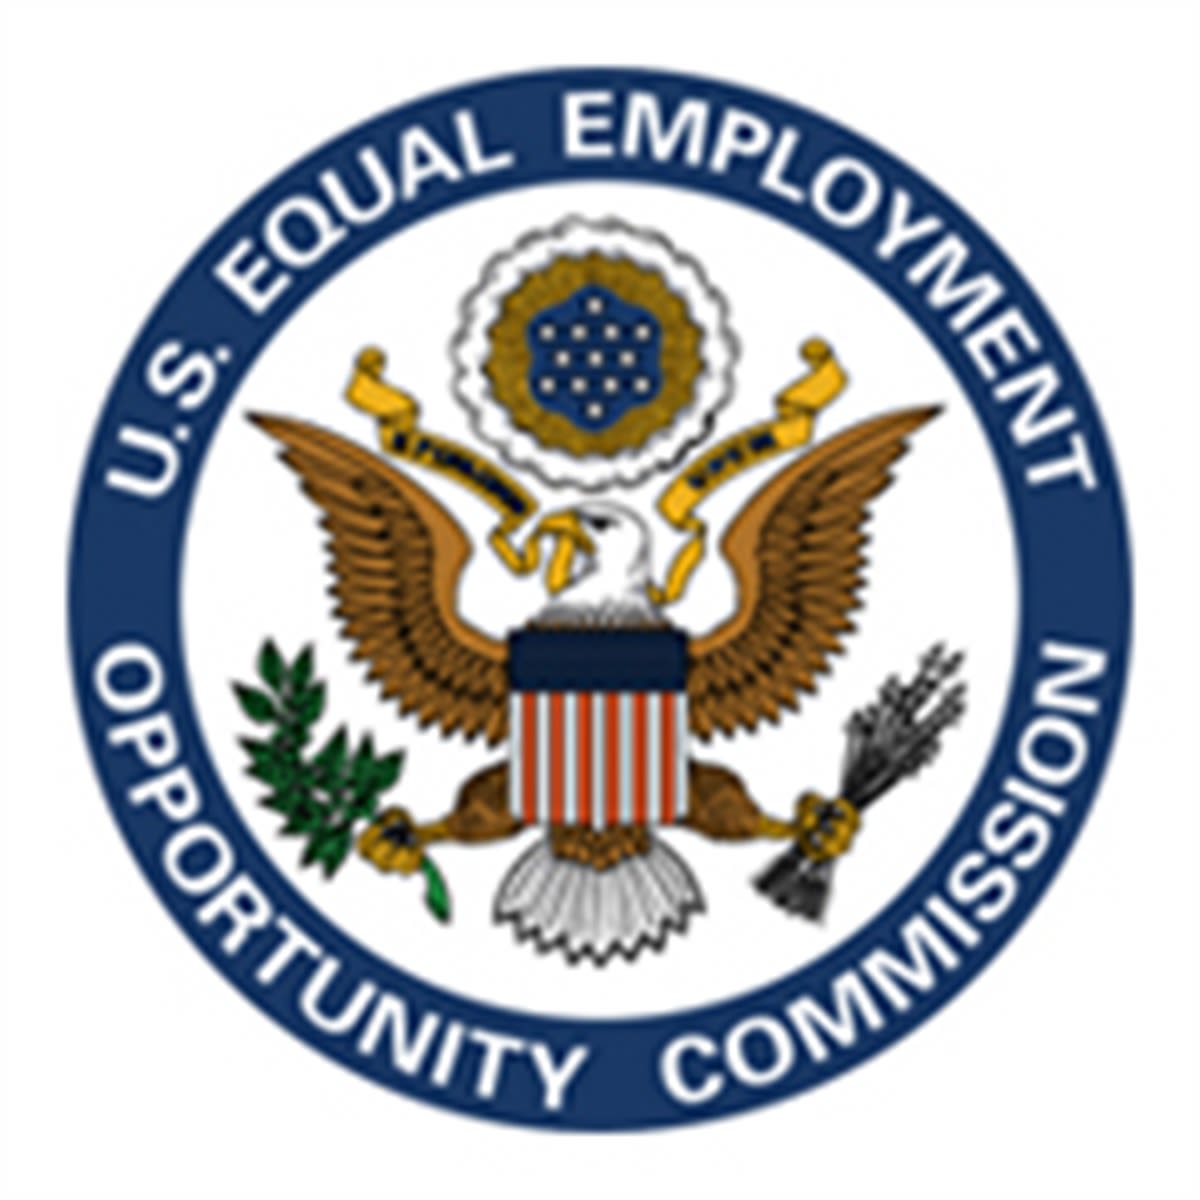 Walmart Agrees to Pay $75,000 in EEOC Disability Discrimination Suit | JD Supra